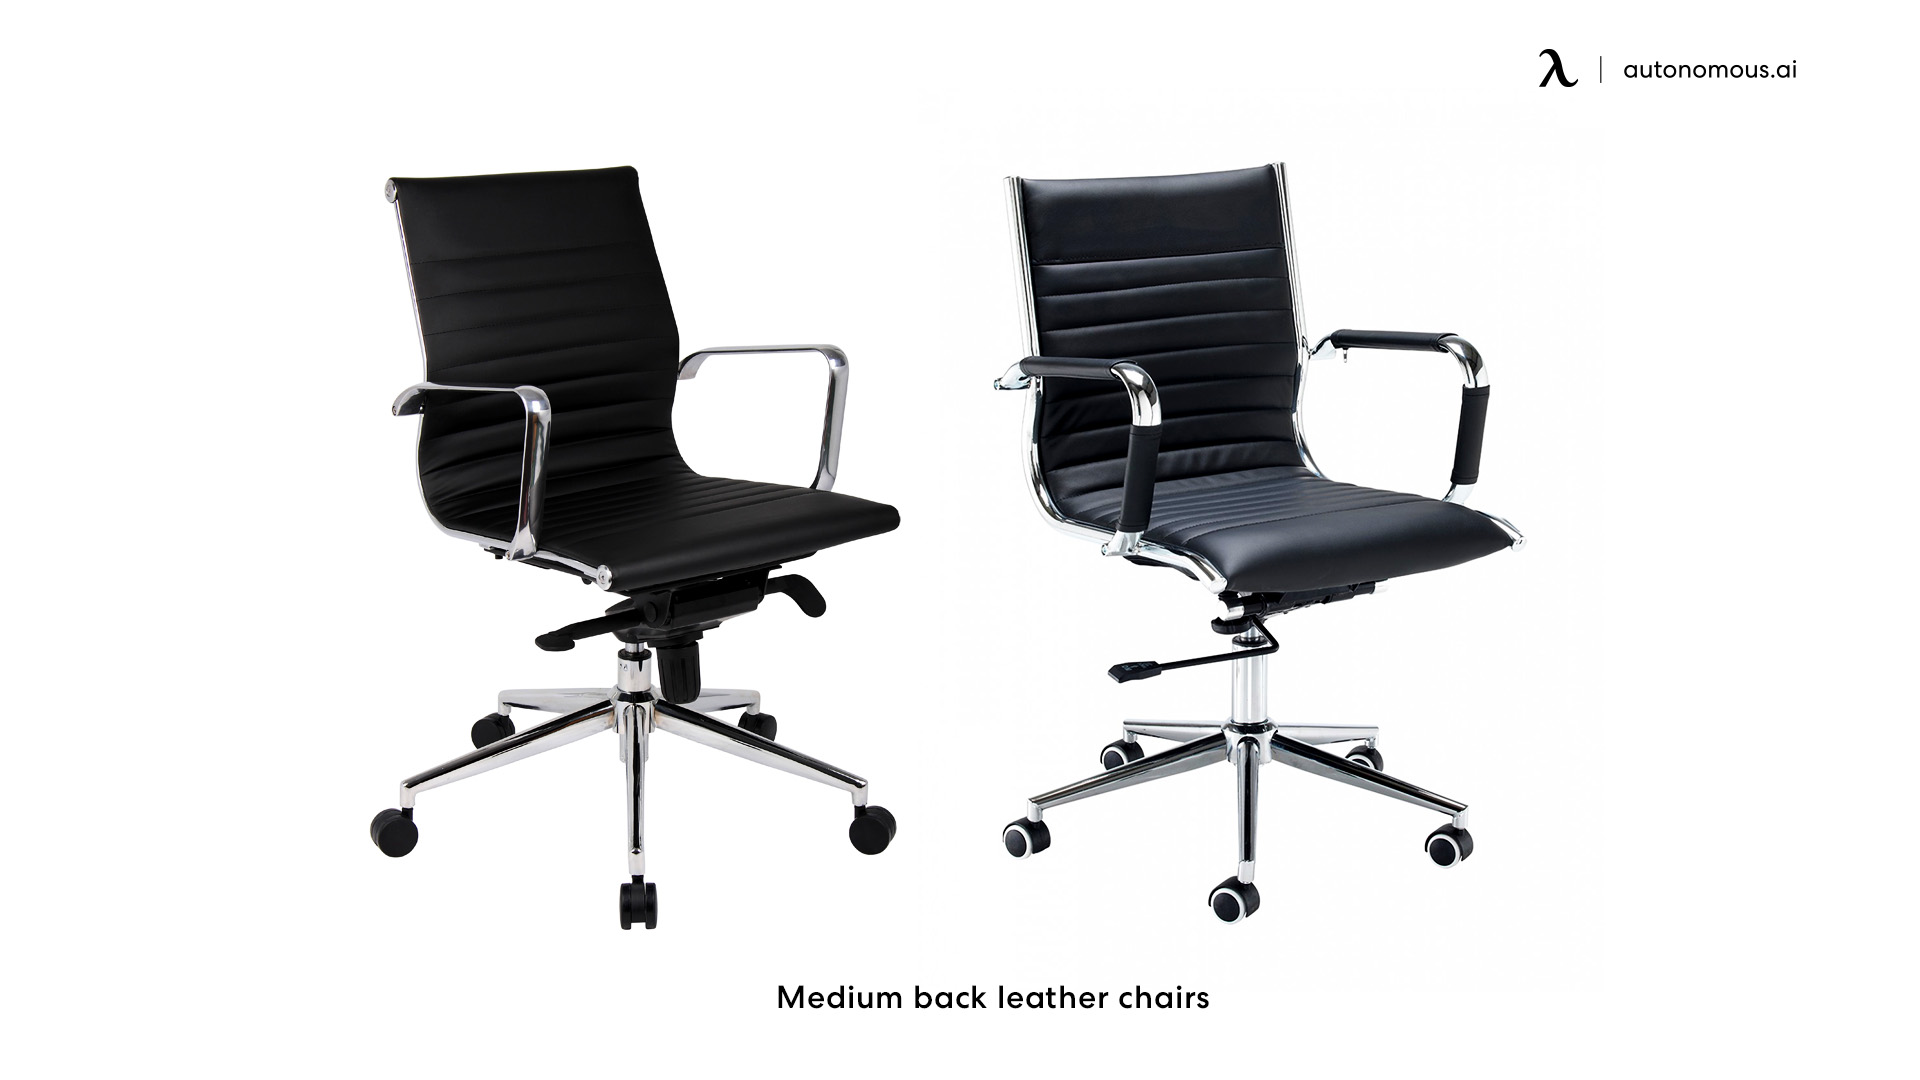 Medium back leather chairs